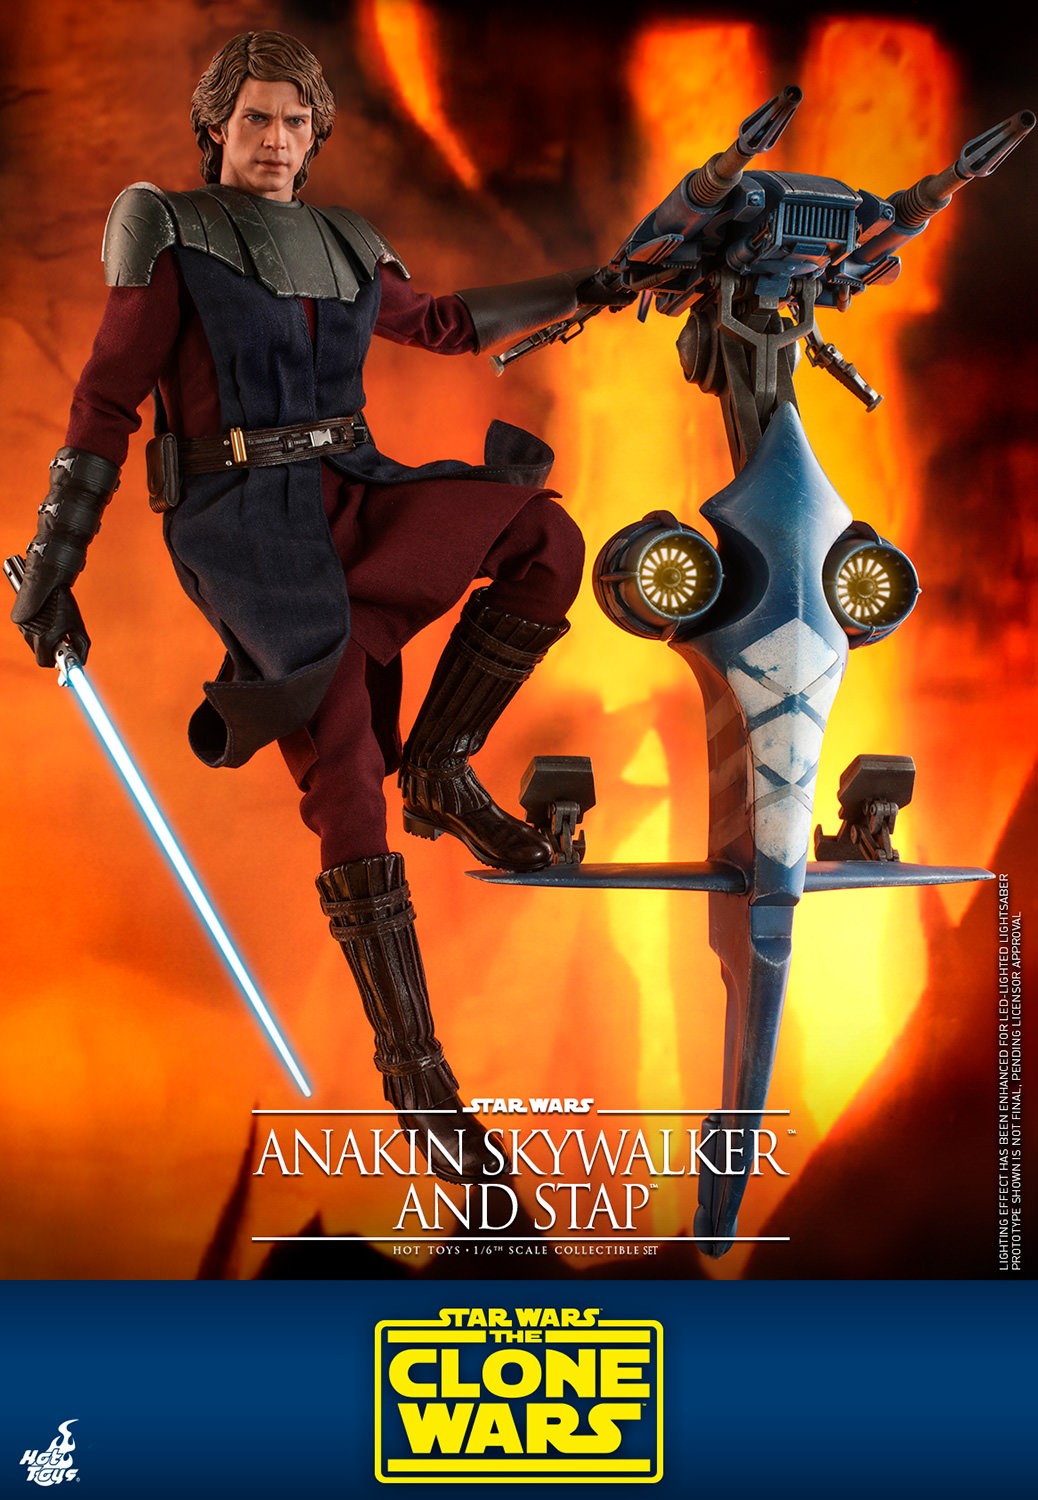 Anakin Skywalker and STAP (Special Edition) Exclusive Edition (Prototype Shown) View 10